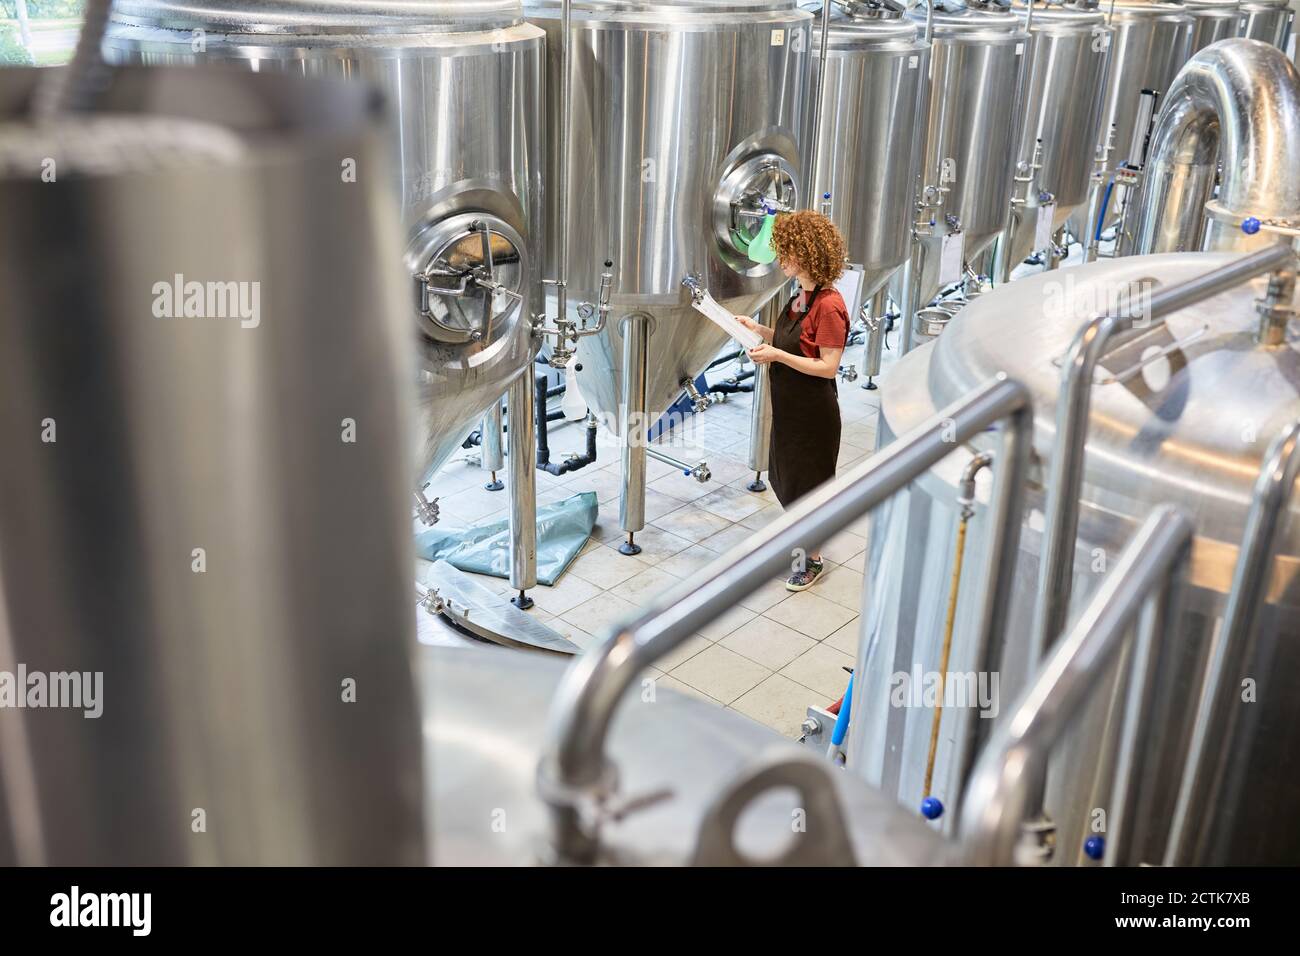 Woman working in craft brewery Stock Photo